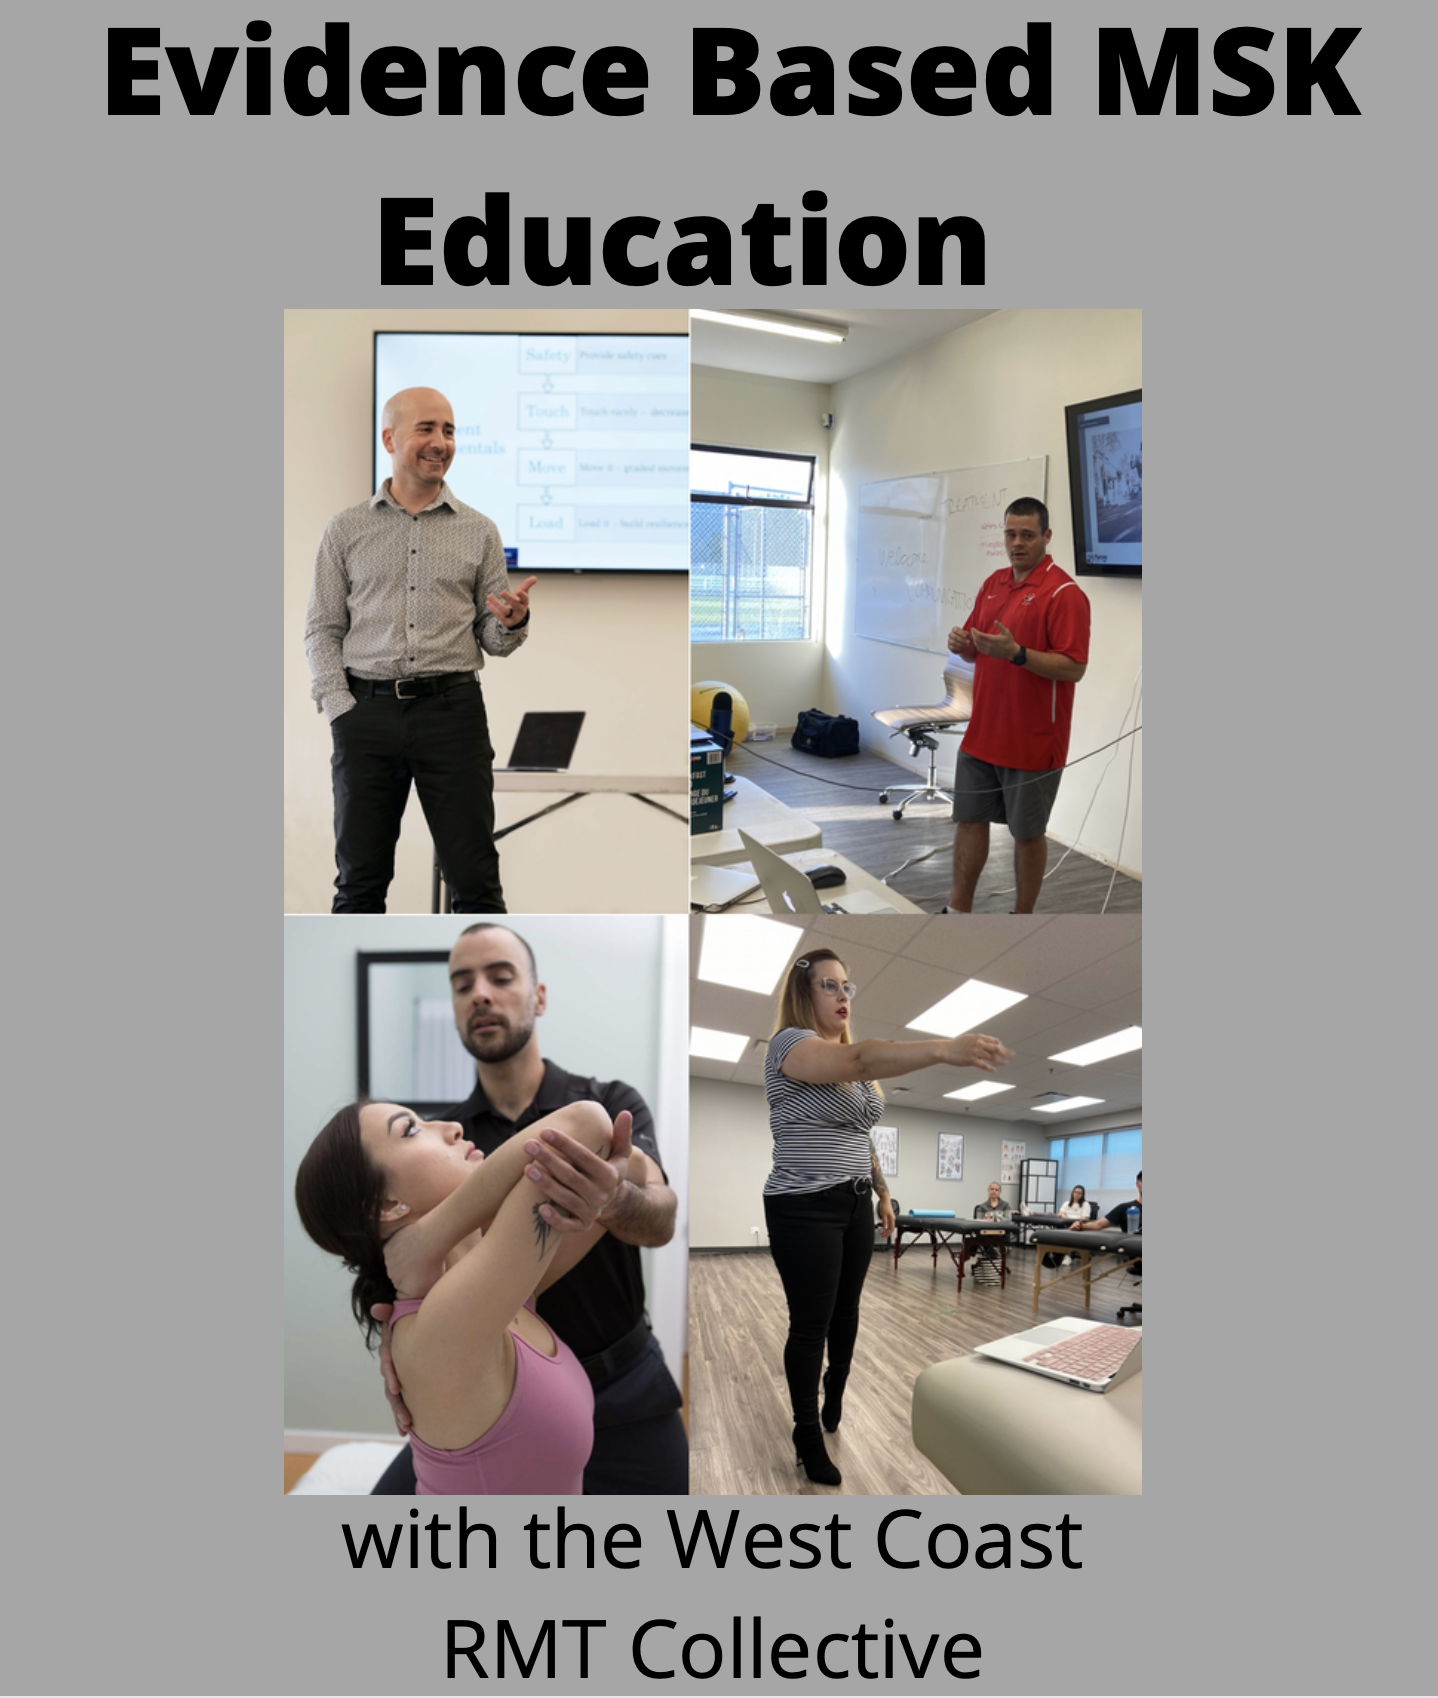 Evidence Based MSK Education With the West Coast RMT Collective